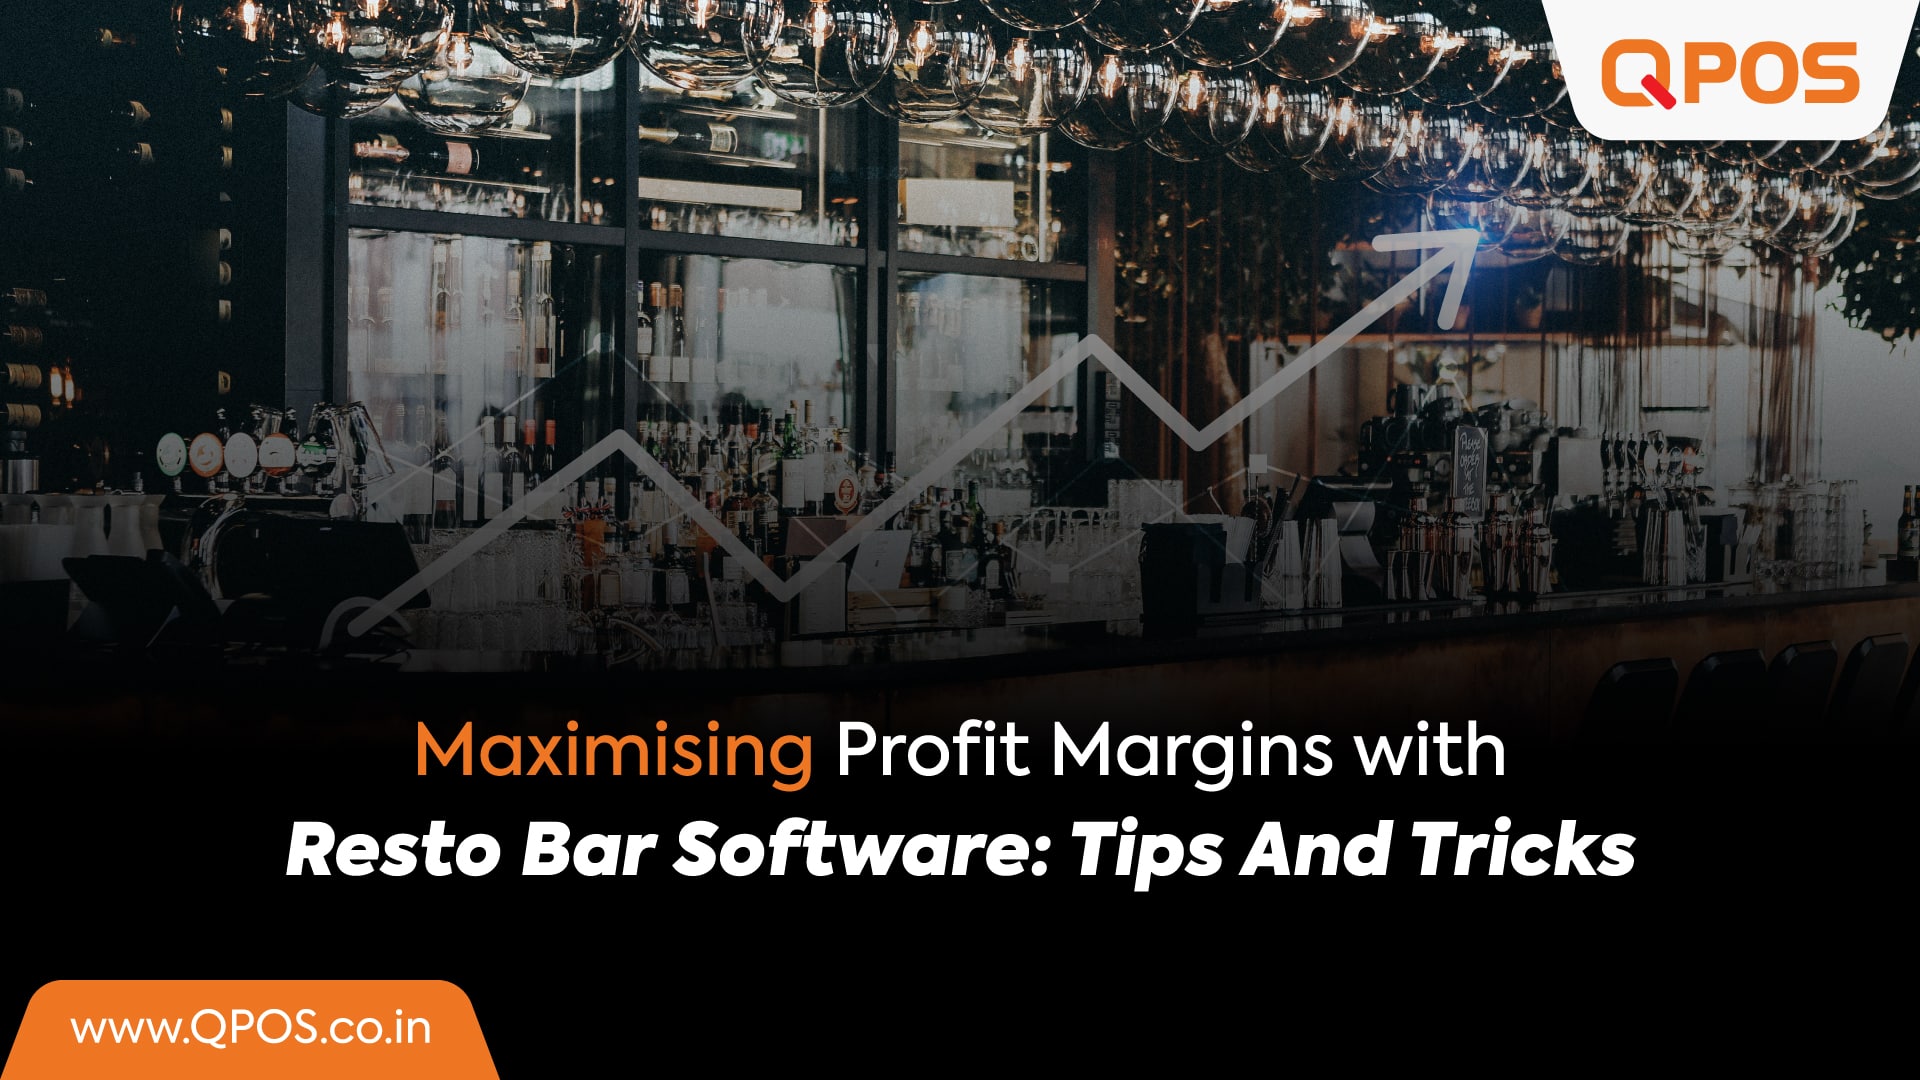 Maximising Profit Margins With Resto Bar Software: Tips And Tricks